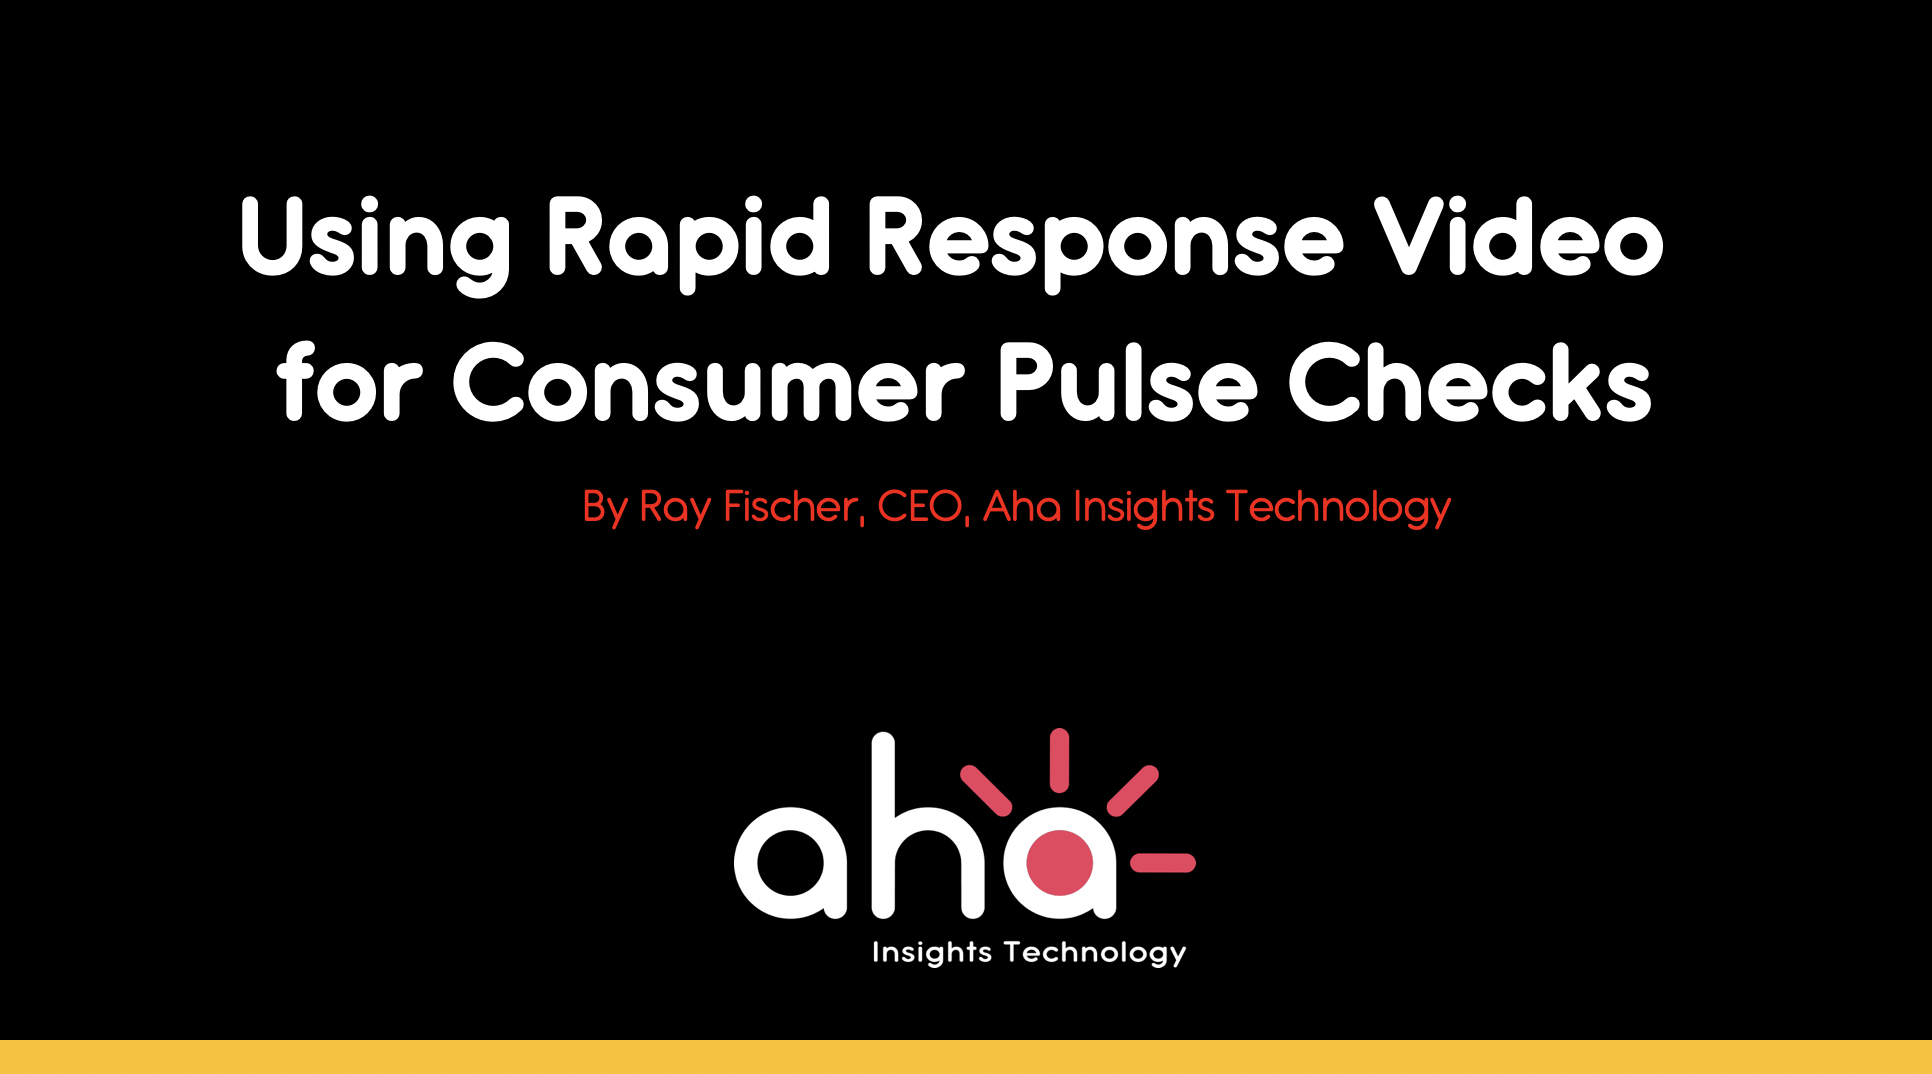 Market Research: Using Rapid Response Video for Consumer Pulse Checks